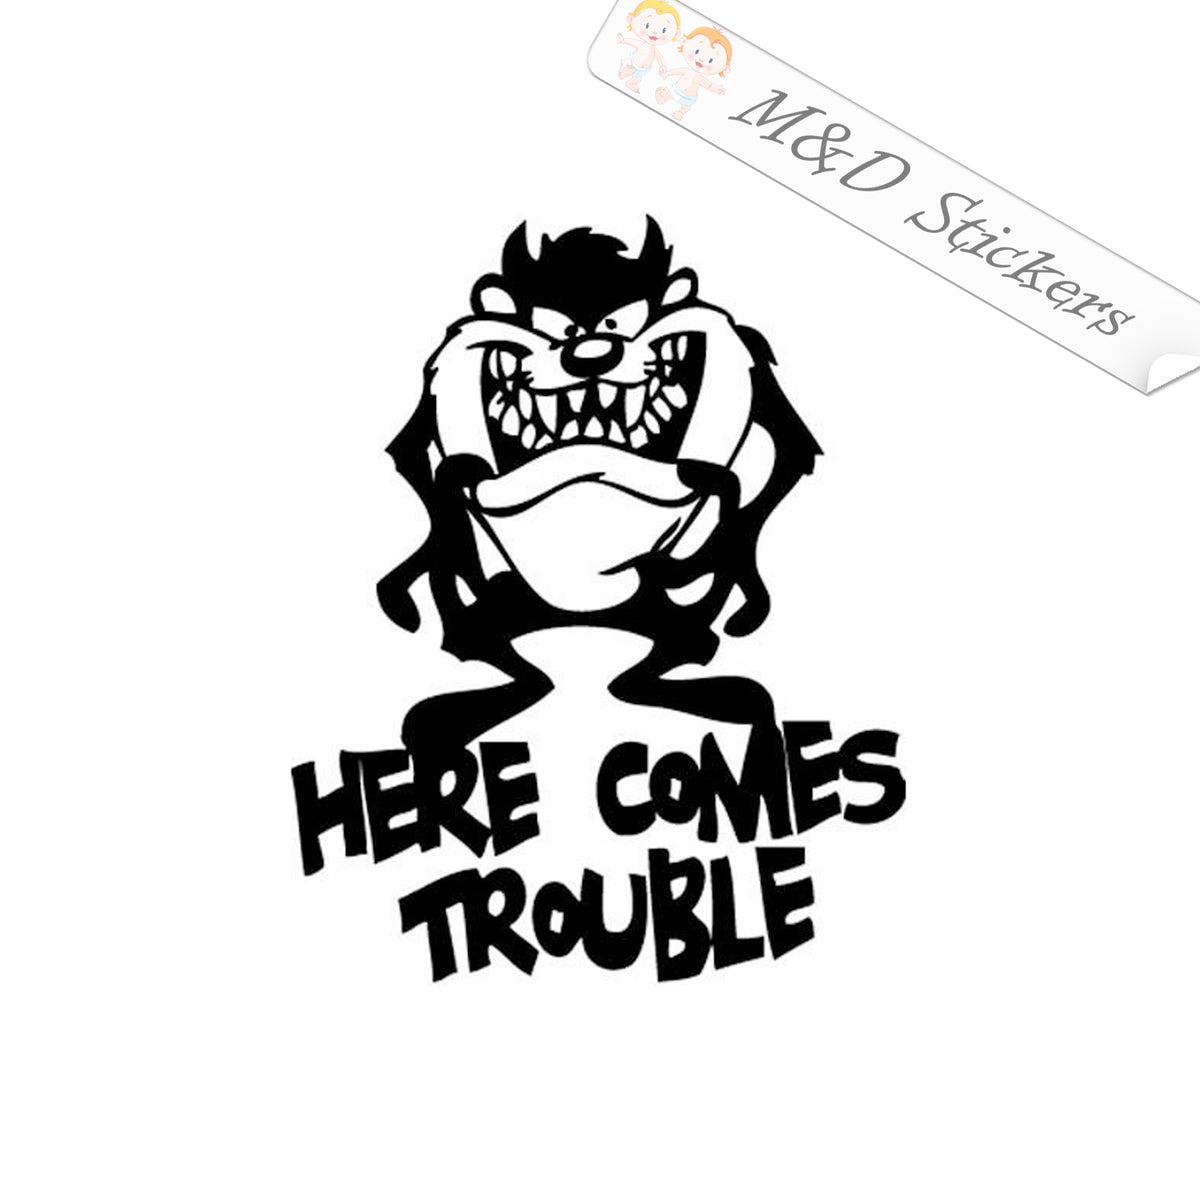 2x Here comes Trouble Vinyl Decal Sticker Different colors  size for Cars /Bikes/Windows